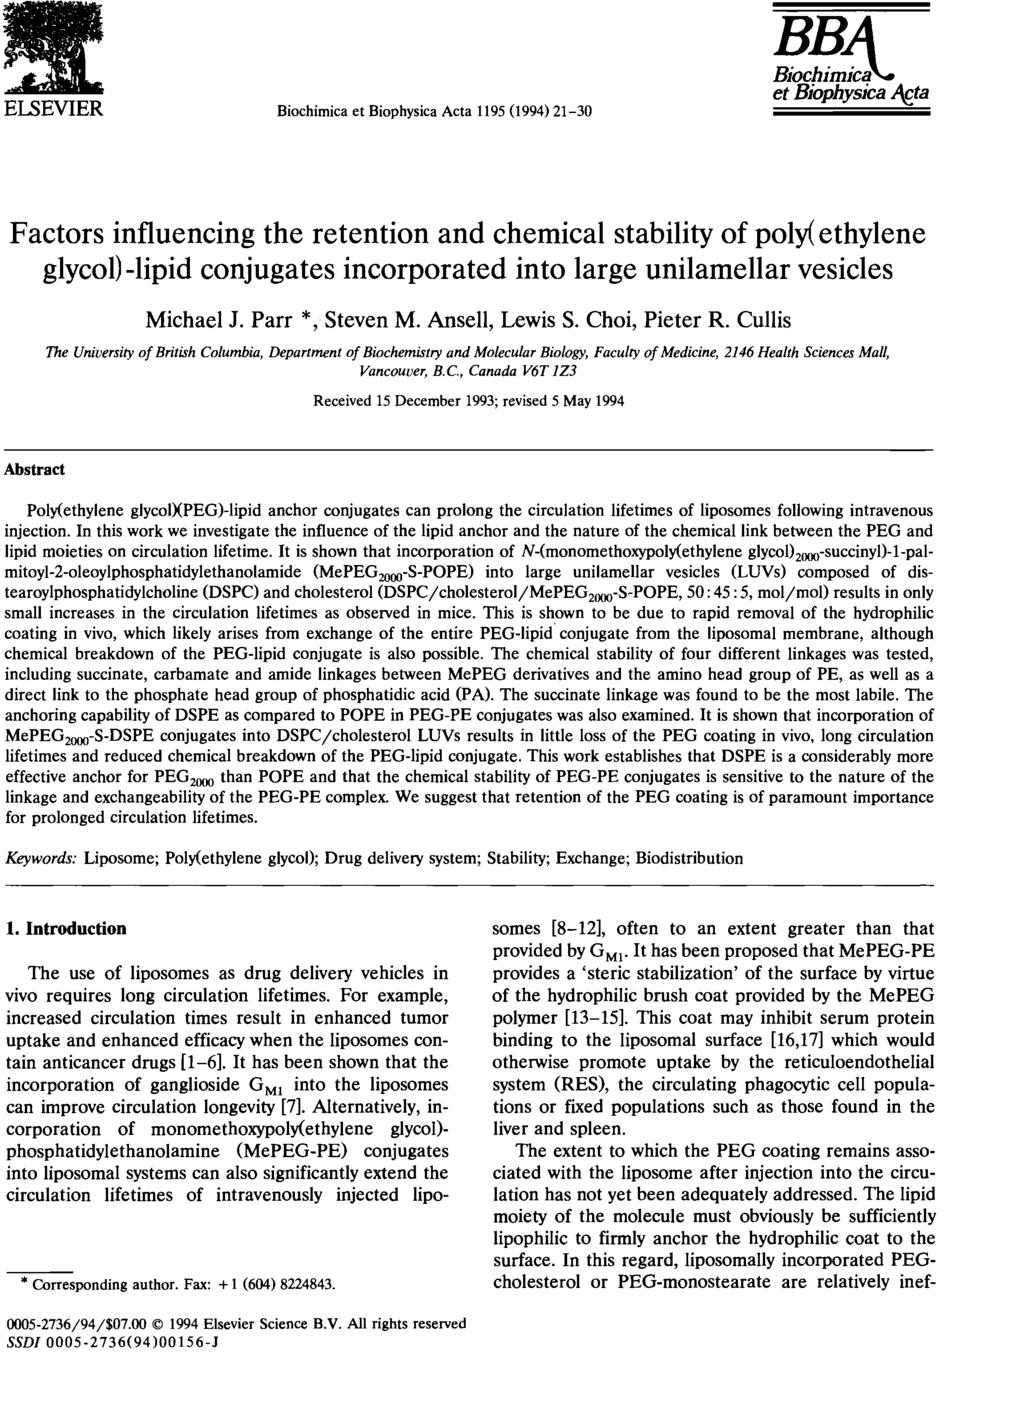 ELSEVIER Bichimica et Biphysica Acta 1195 (1994) 21-30 BB Bichi~ic~a et Biphysica A~ta Factrs influencing the retentin and chemical stability f ply(ethylene glycl)-lipid cnjugates incrprated int